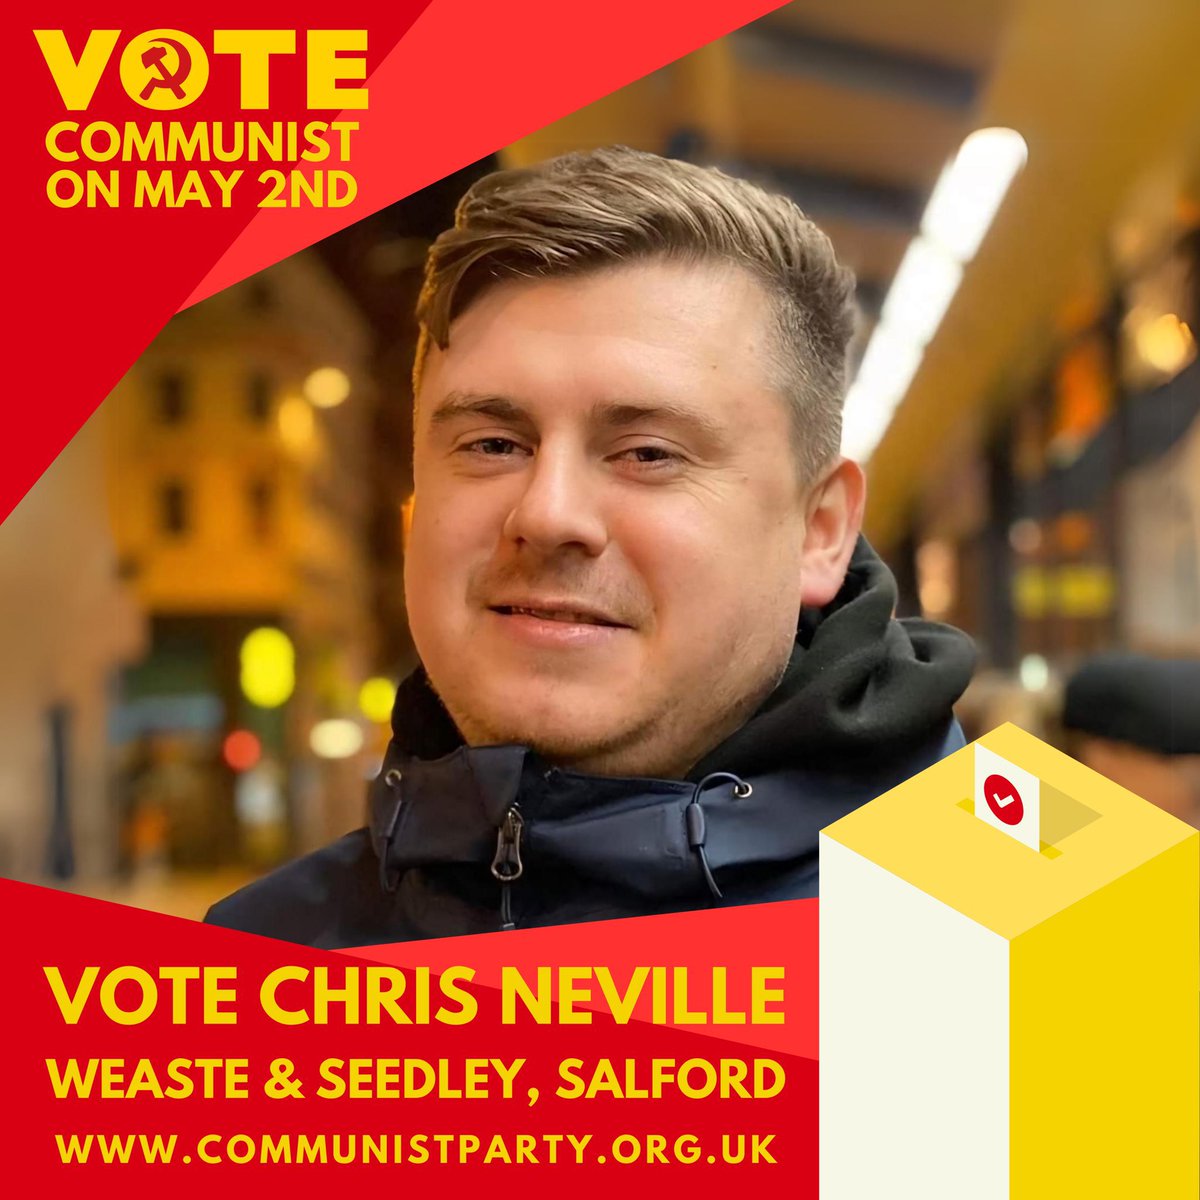 Since 1990s, the number of UK councils has fallen by 77 pc. The number of elected councillors down by 30 pc. Government mayor & ‘devolution’ rules have reduced representation of people. We need local & regional democracy & influence. Vote Chris Neville @SalfordCouncil @CPBritain